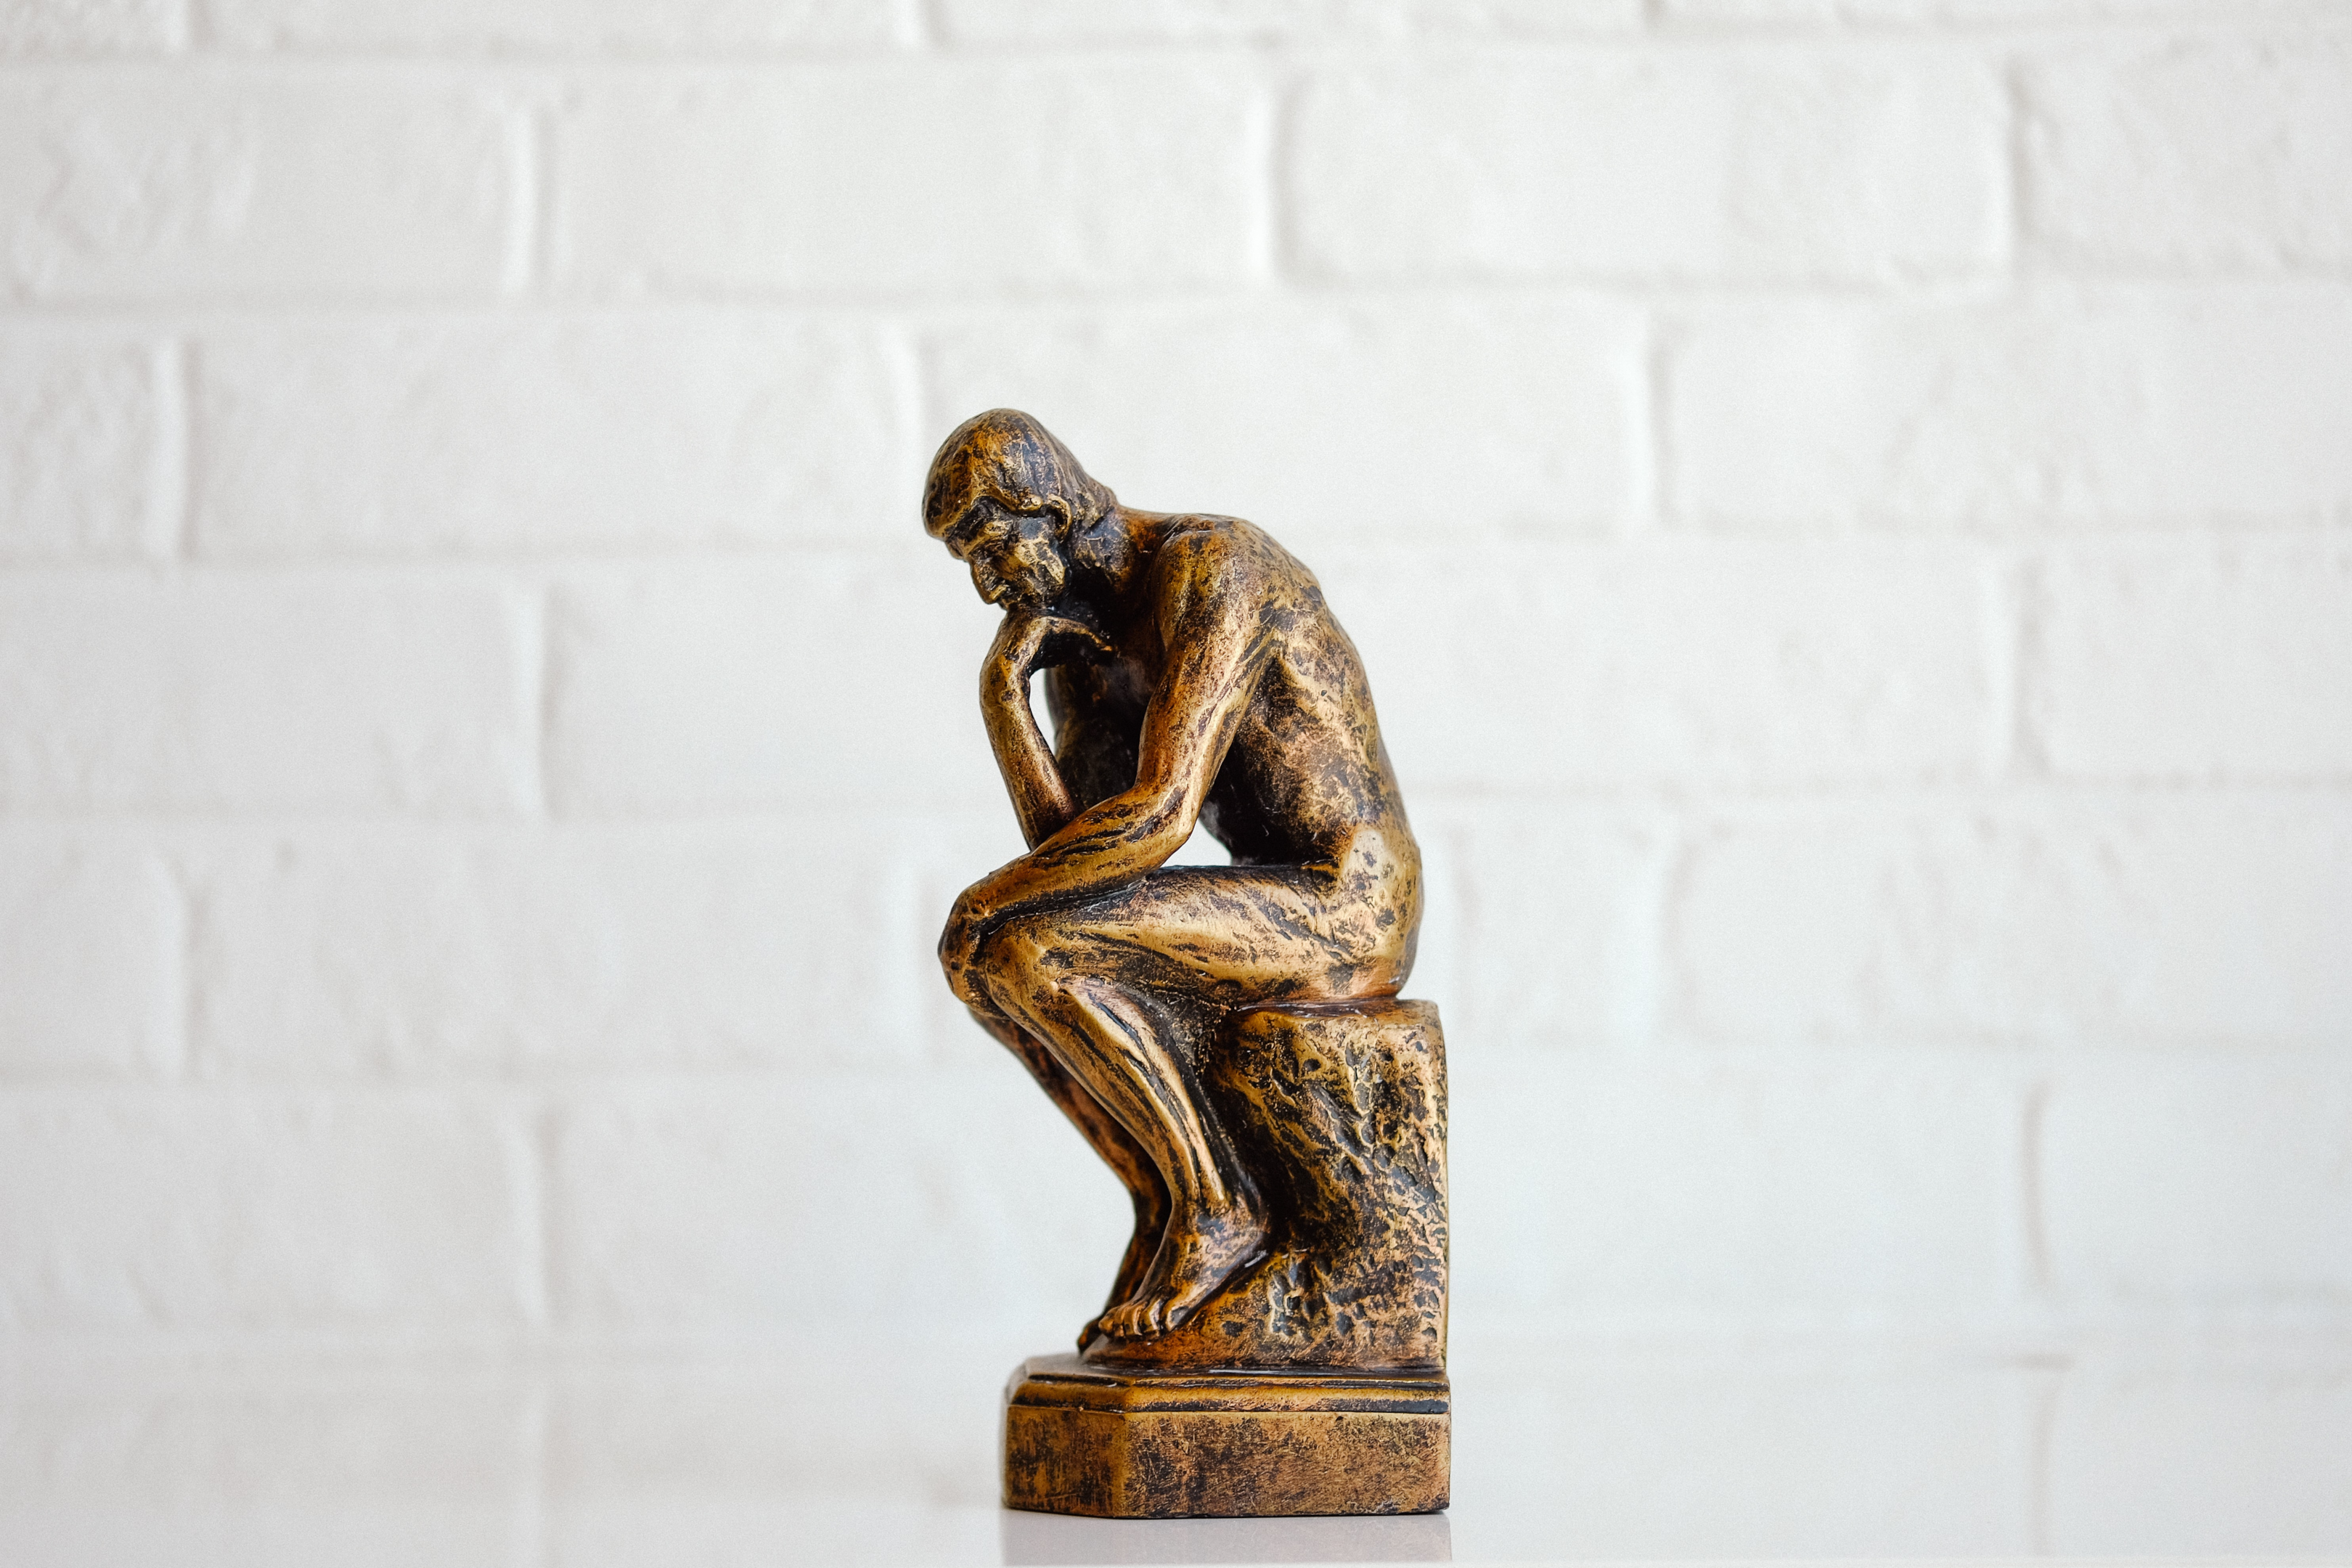 The Thinker (1880) by Auguste Rodin | Photo from Unsplash